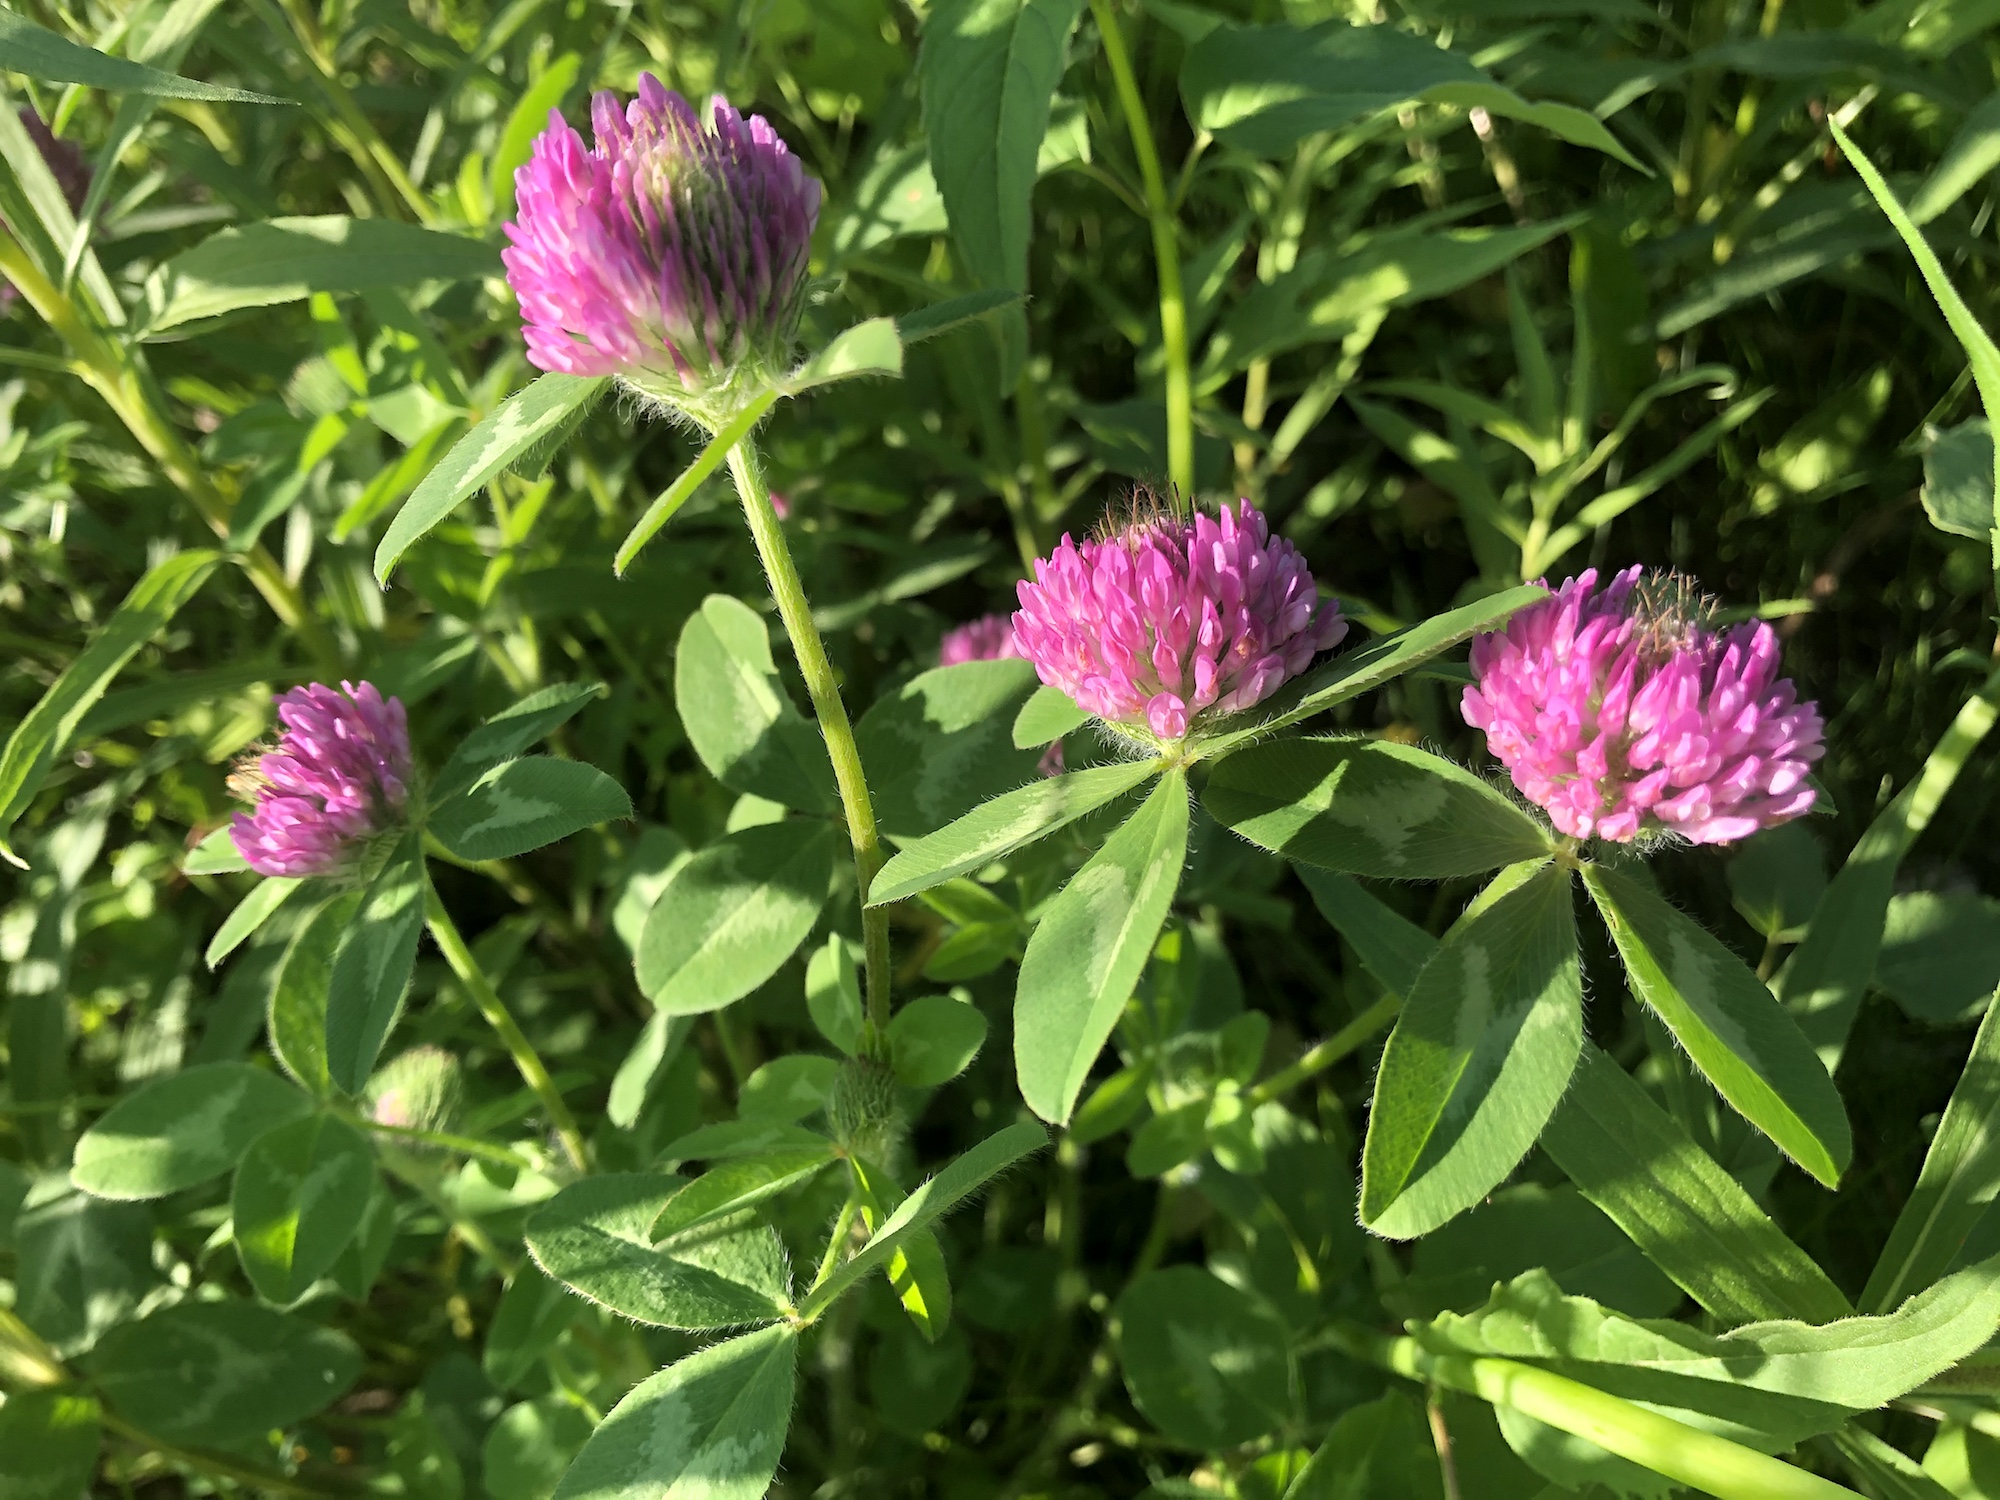 Red Clover on the bank of the retaining pond on June 2, 2020.